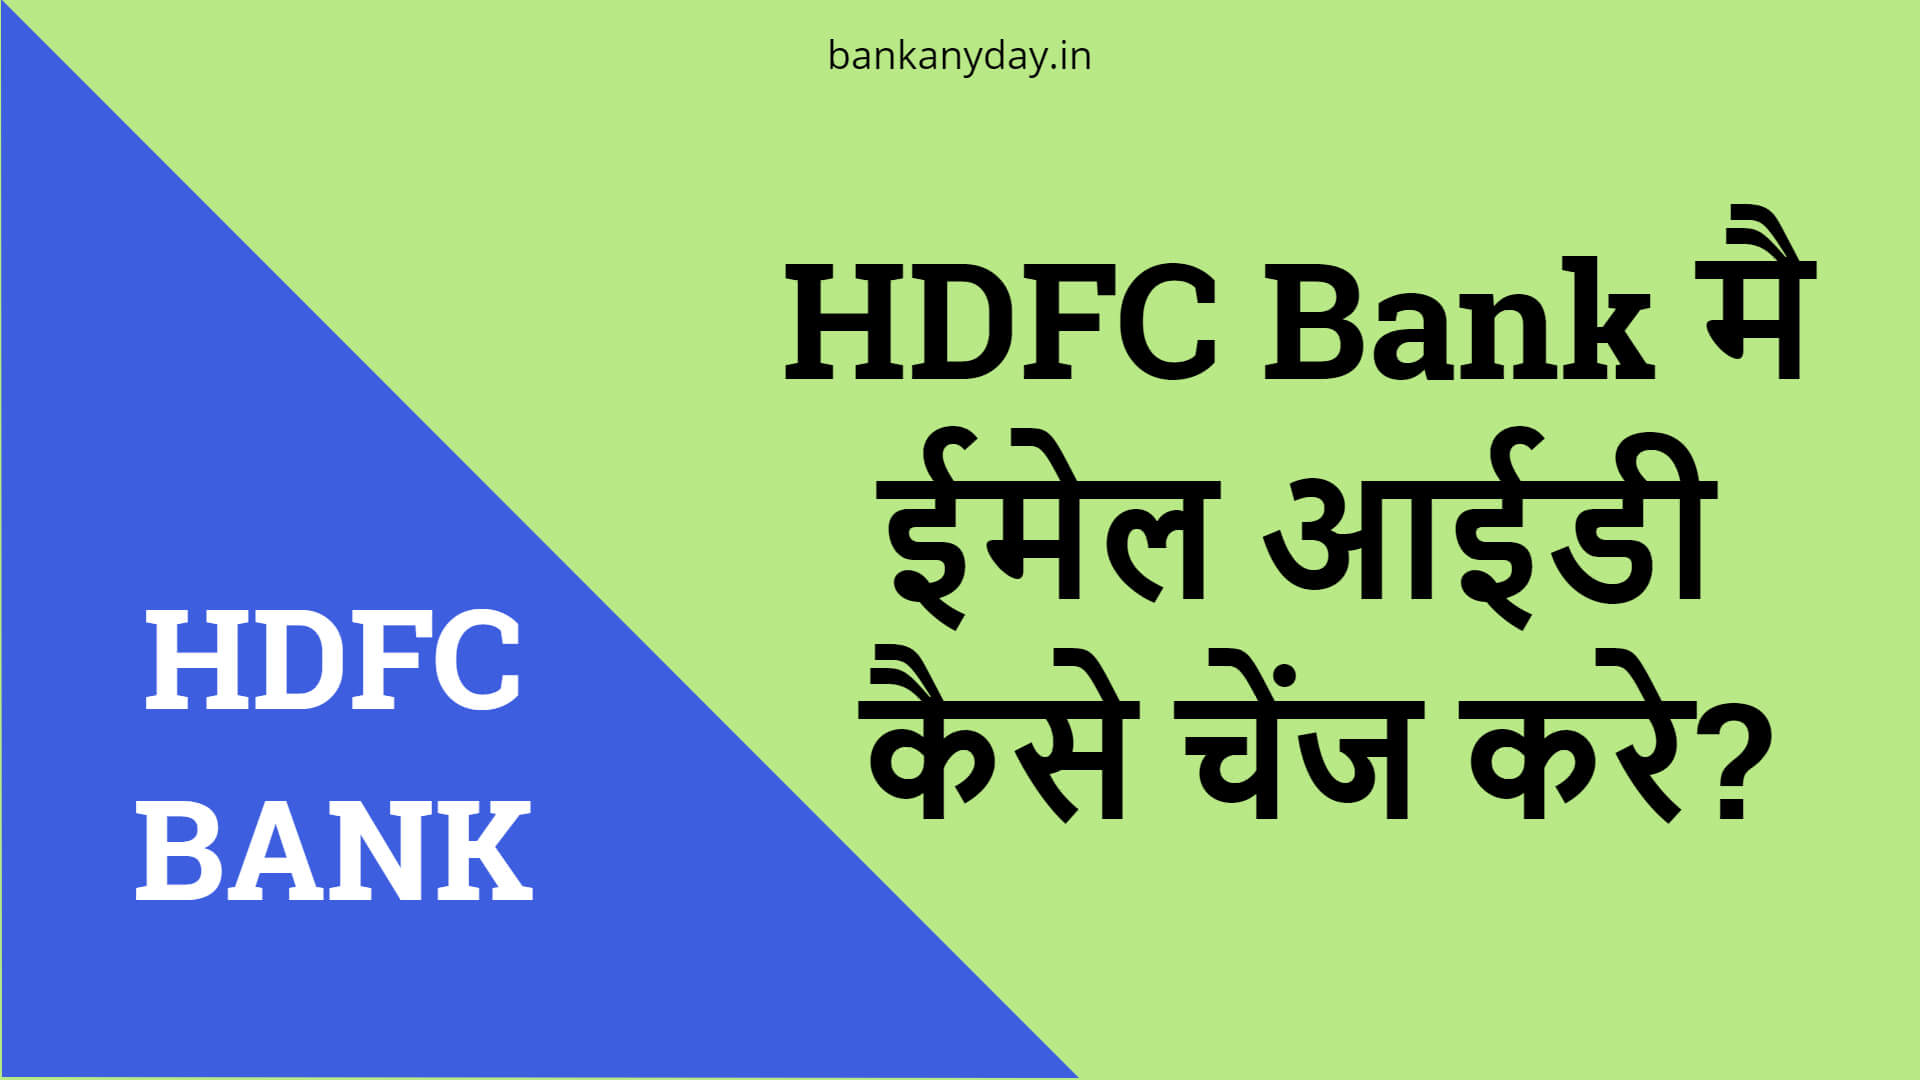 HDFC bank me email id kaise change kare